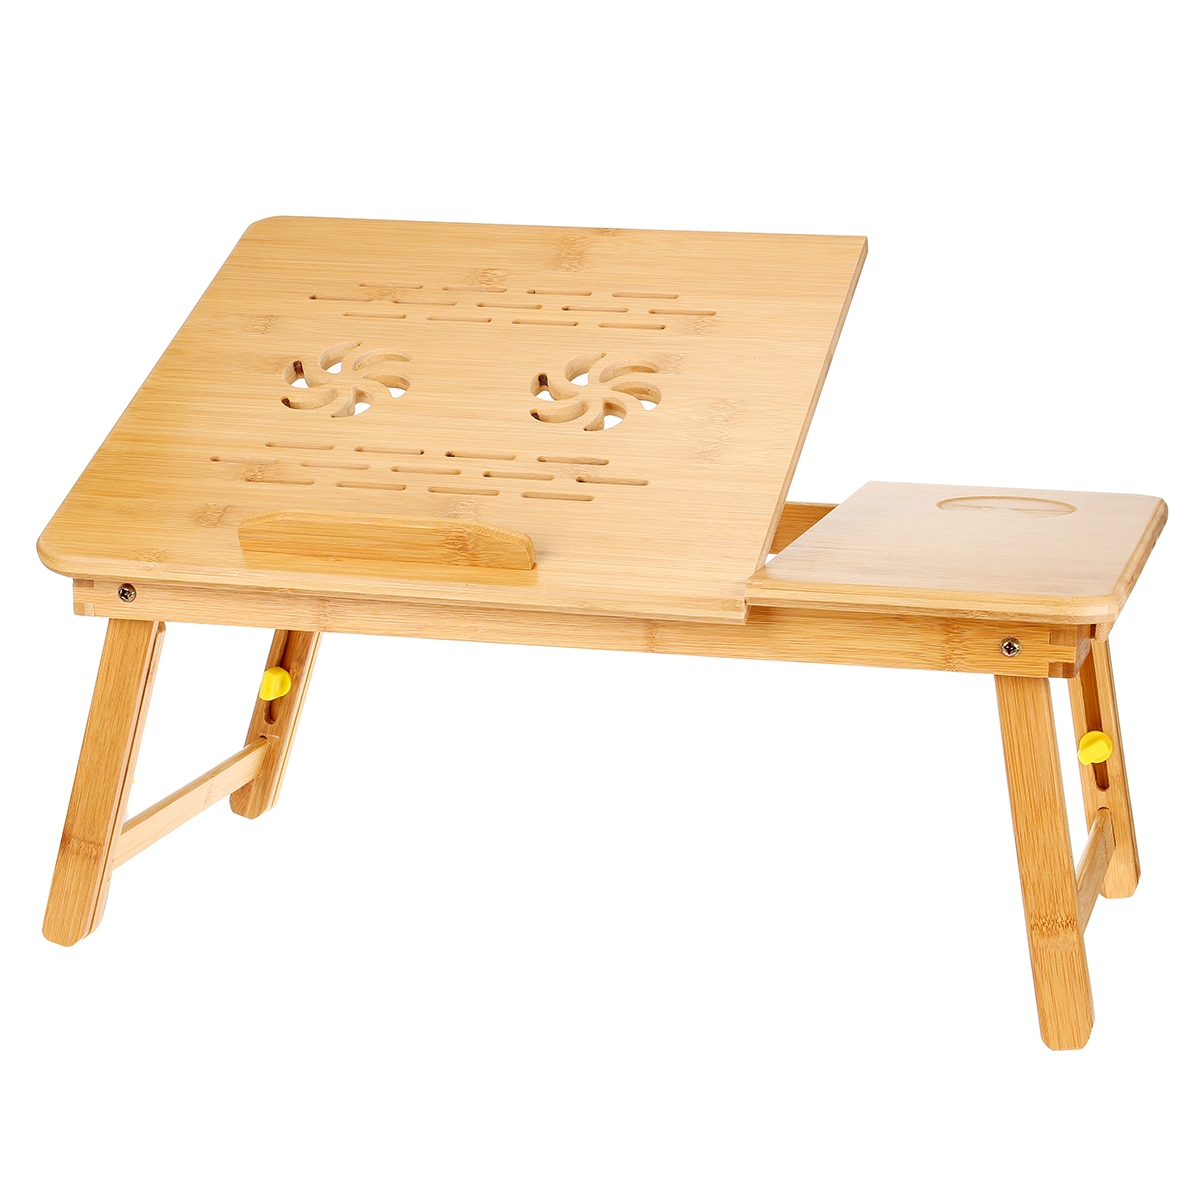 Bamboo-Laptop-Notebook-Bed-Desk-Table-Holder-Sofa-Tray-Cooling-Stand-With-Drawer-1805025-6